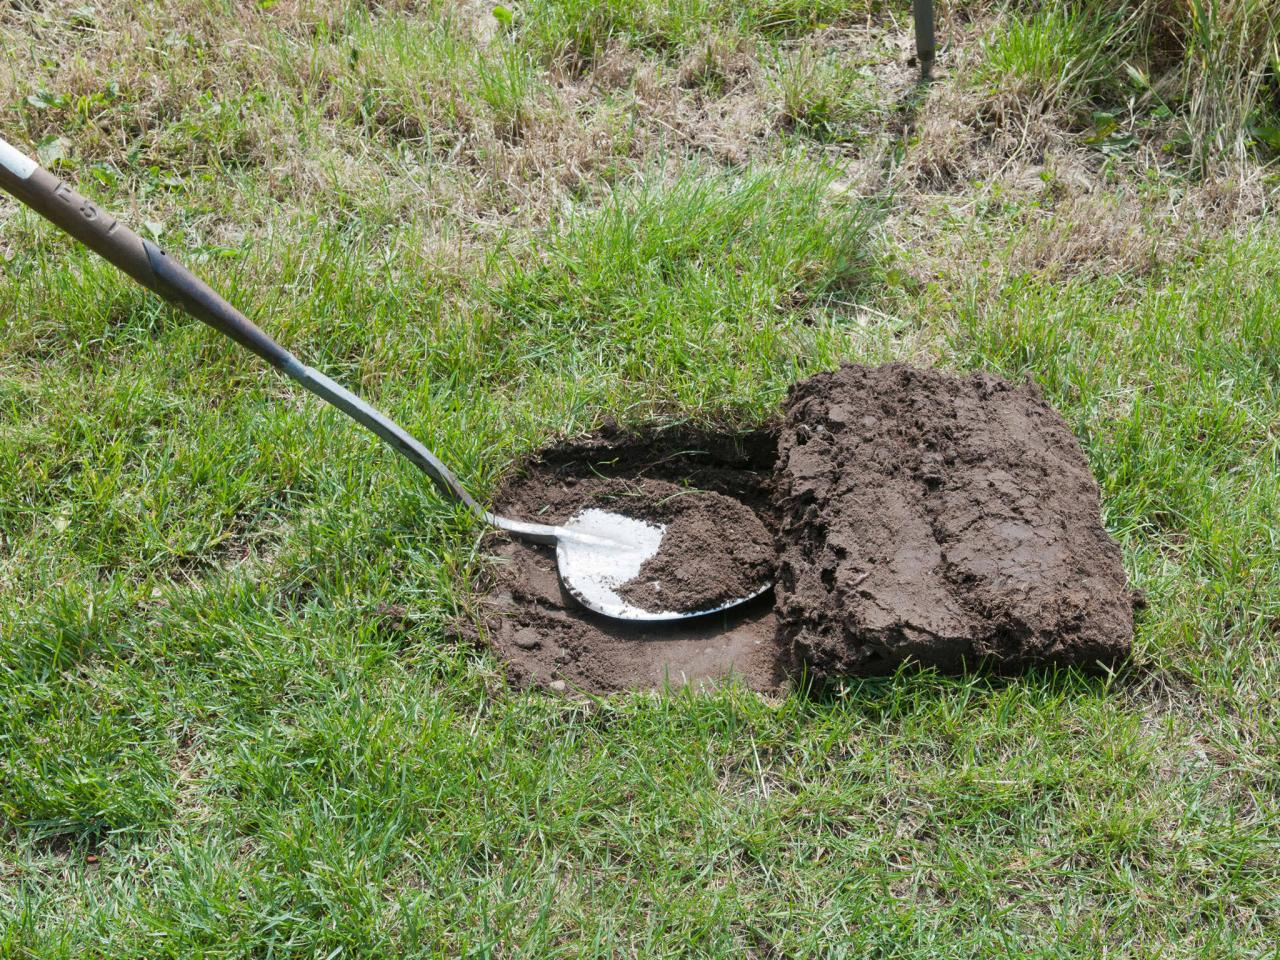 A shovel is being used to dig a hole for planting vegetables.